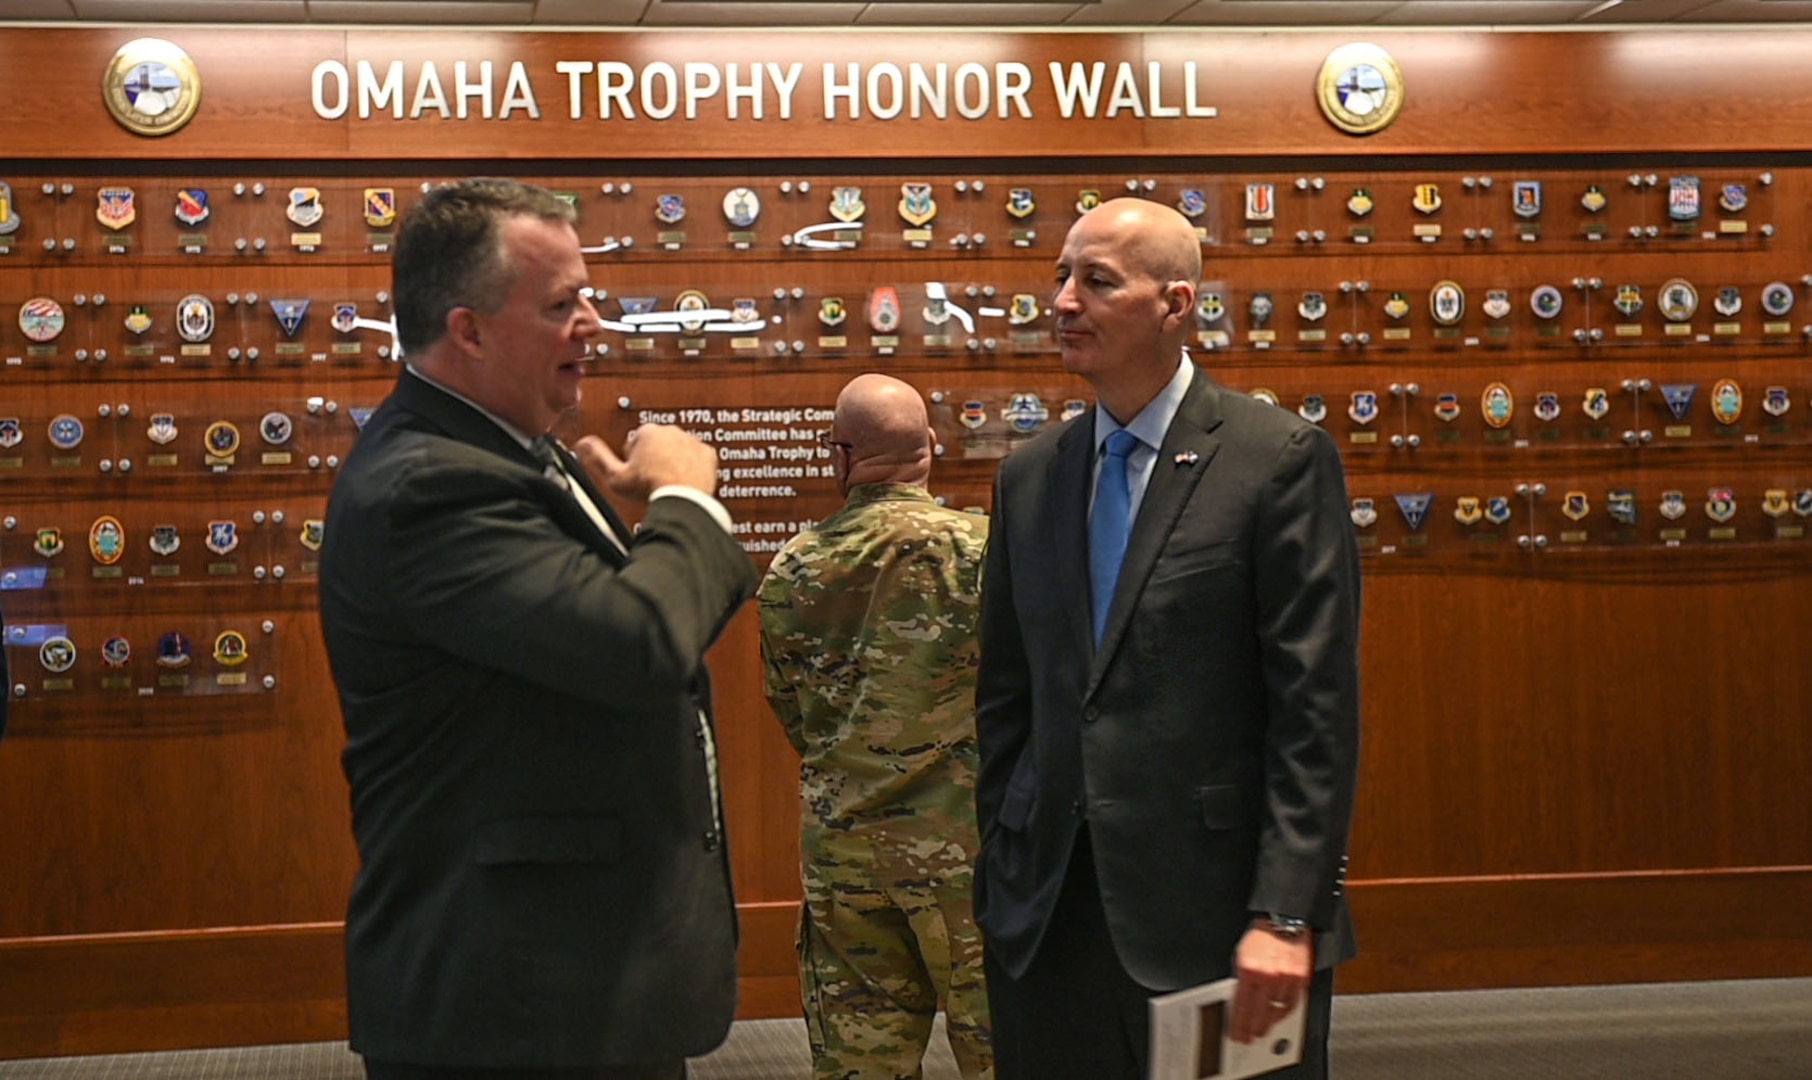 The Omaha Trophy Honor Wall showcases 125 patches from every unit that has received the award in chronological order with room for future recipient units.